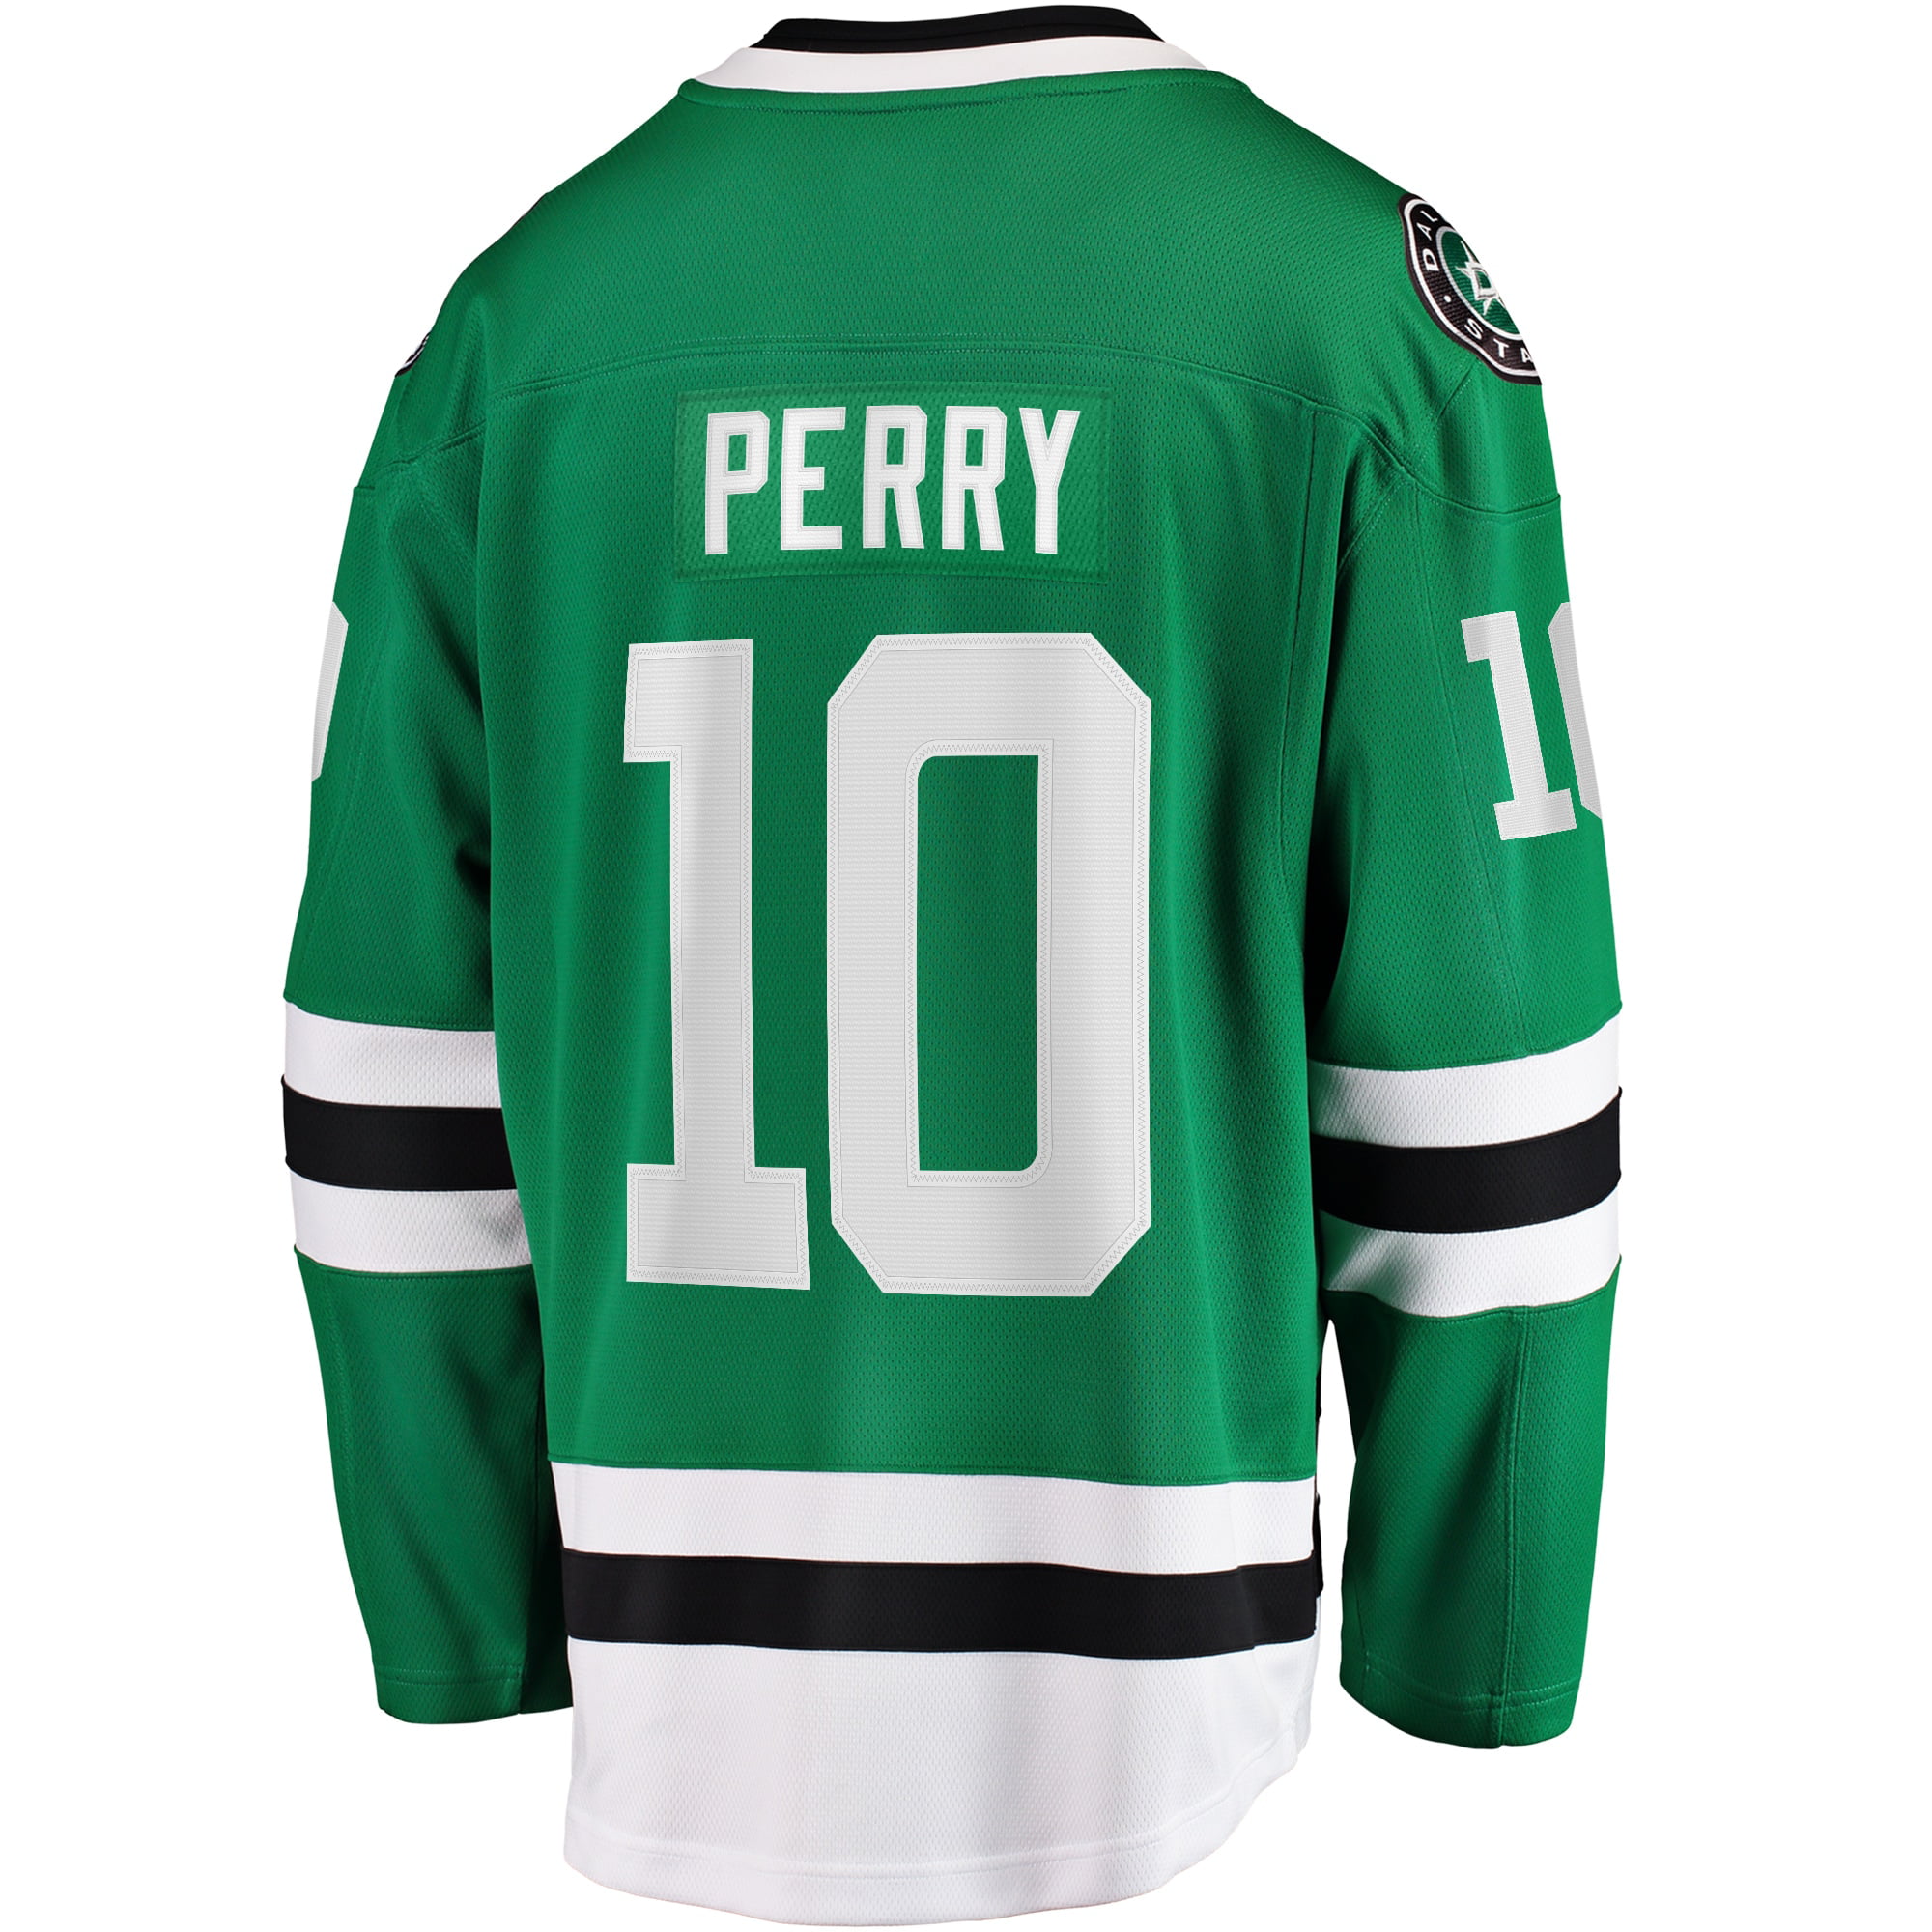 corey perry youth jersey